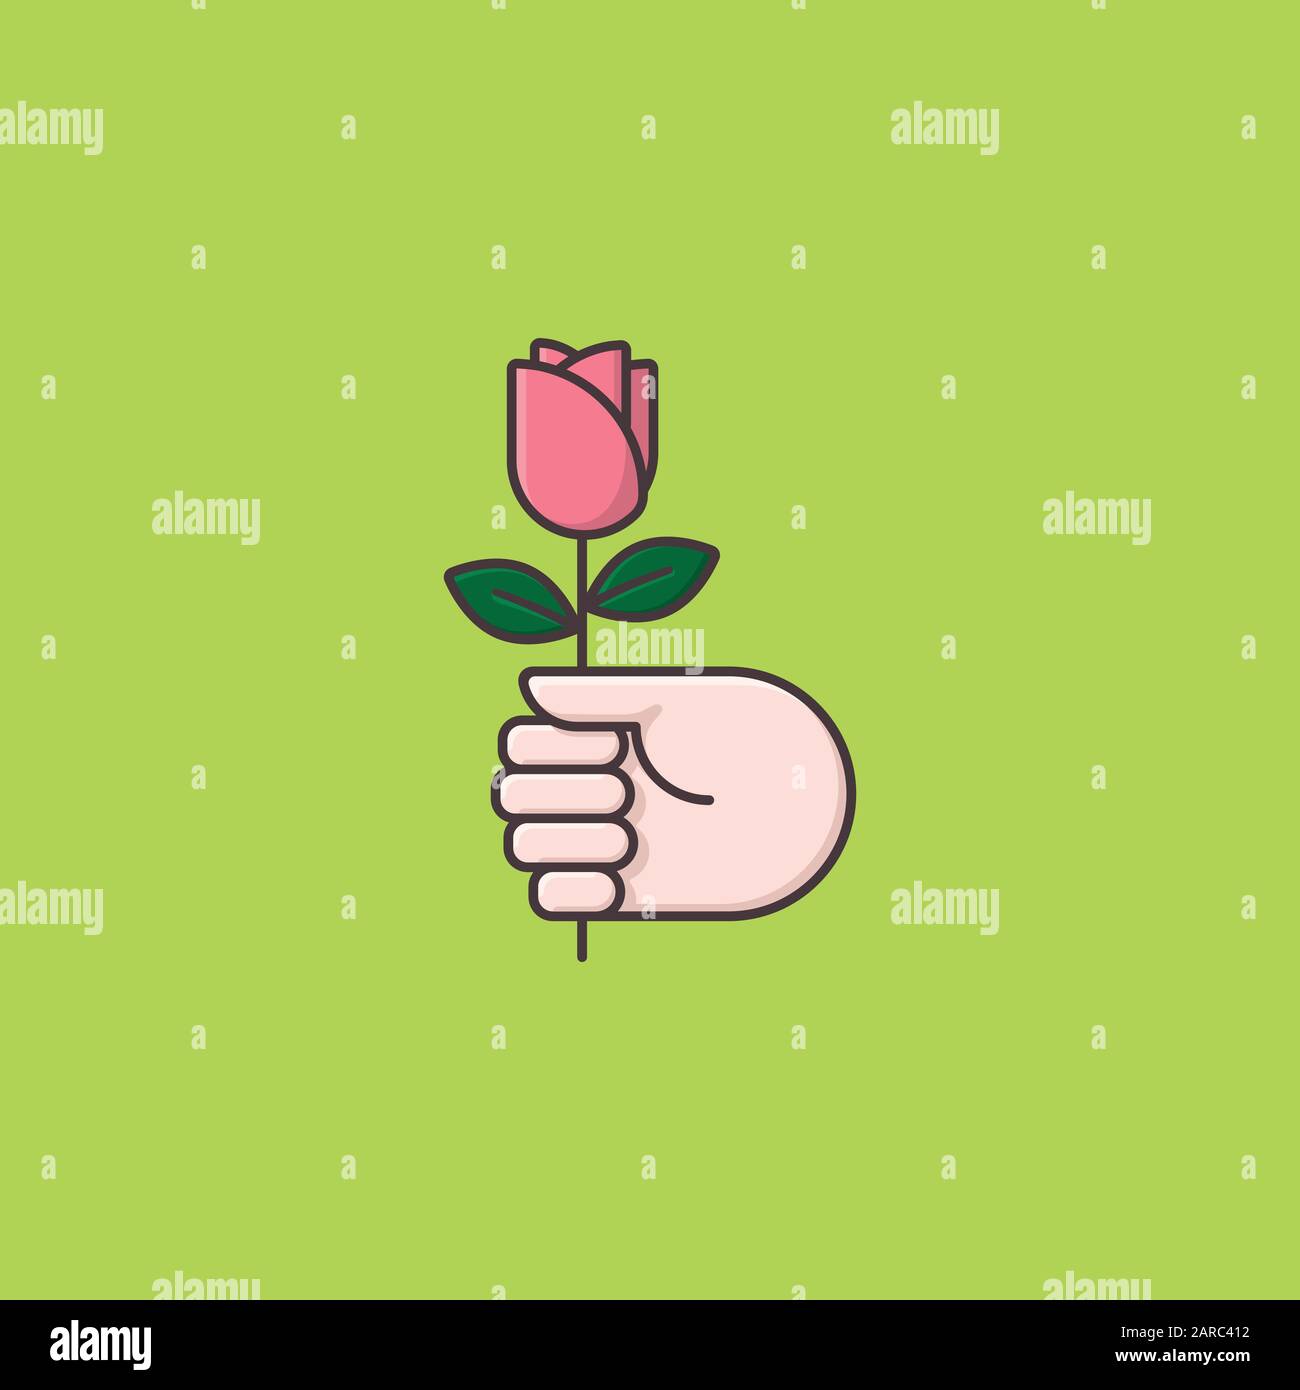 Hand giving rose flower vector illustration for #RandomActsOfKindnessDay on February 17. Appreciation and Kindness color symbol Stock Vector